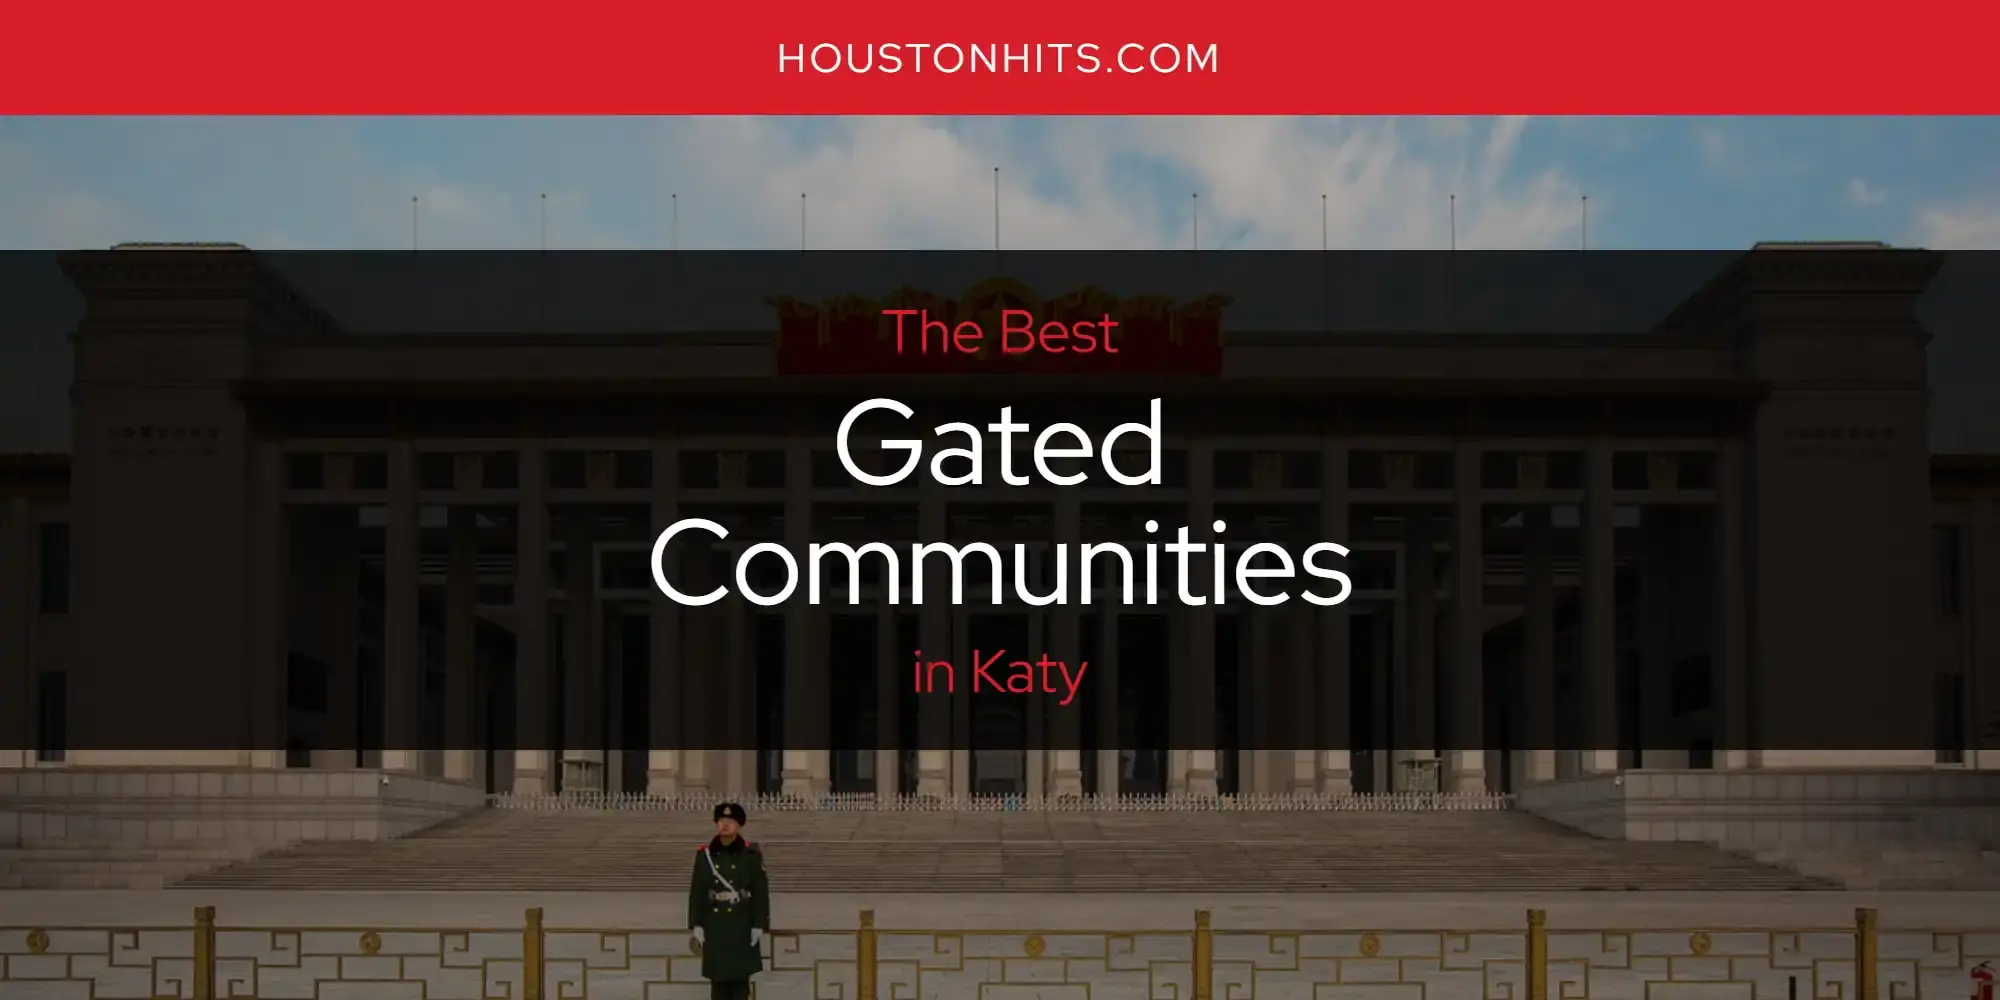 Best Gated Communities in Katy? Here's the Top 17